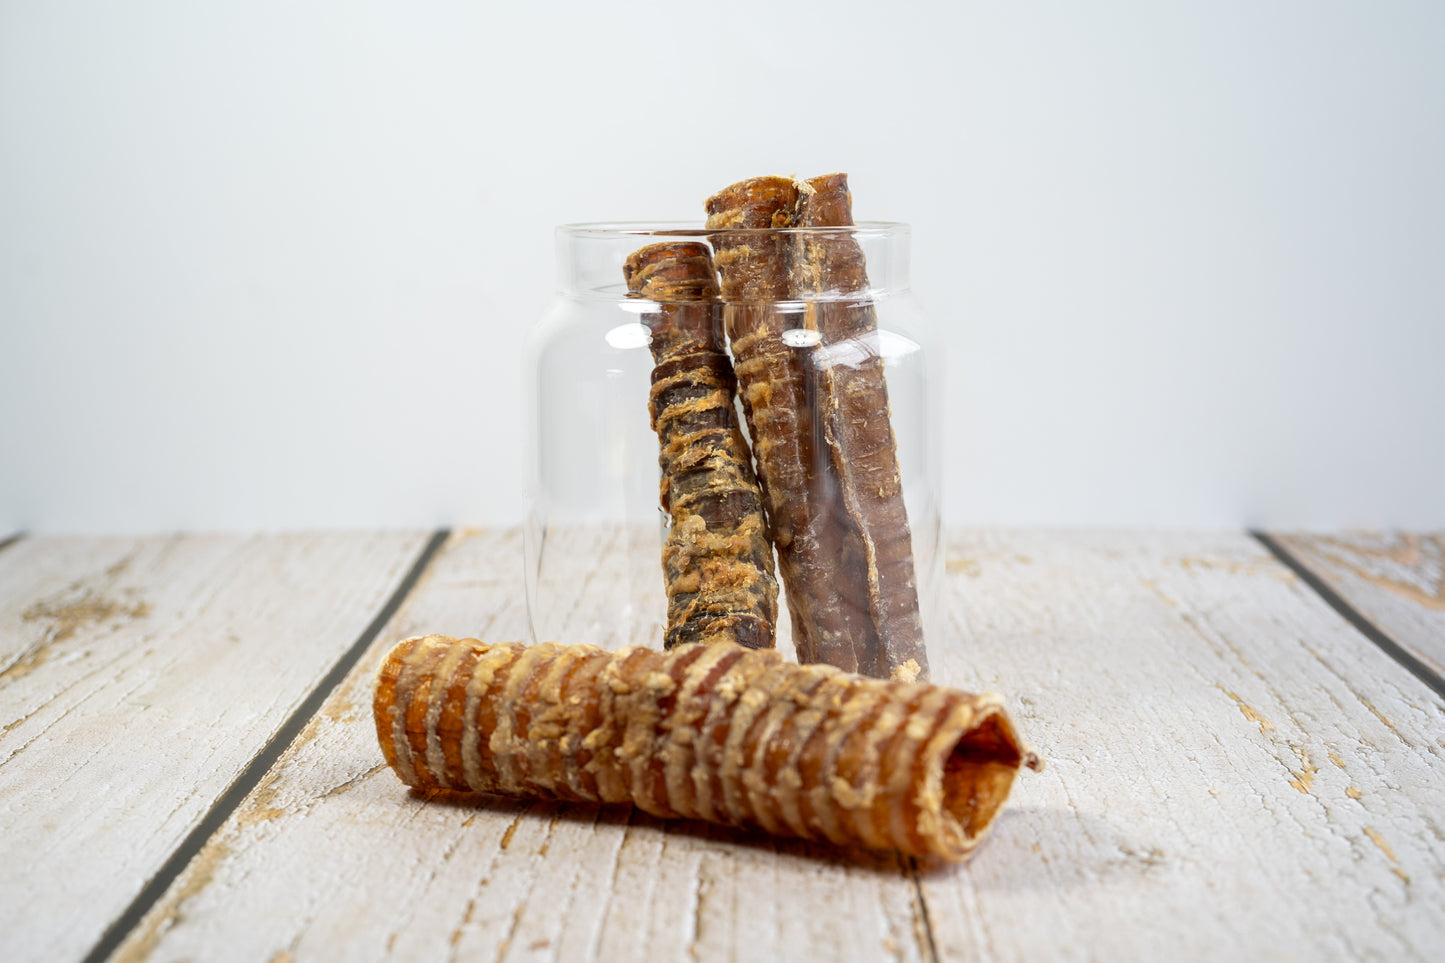 Beef trachea for dogs is made up of cartilage, which is rich in chondroitin and they are great for joint health.